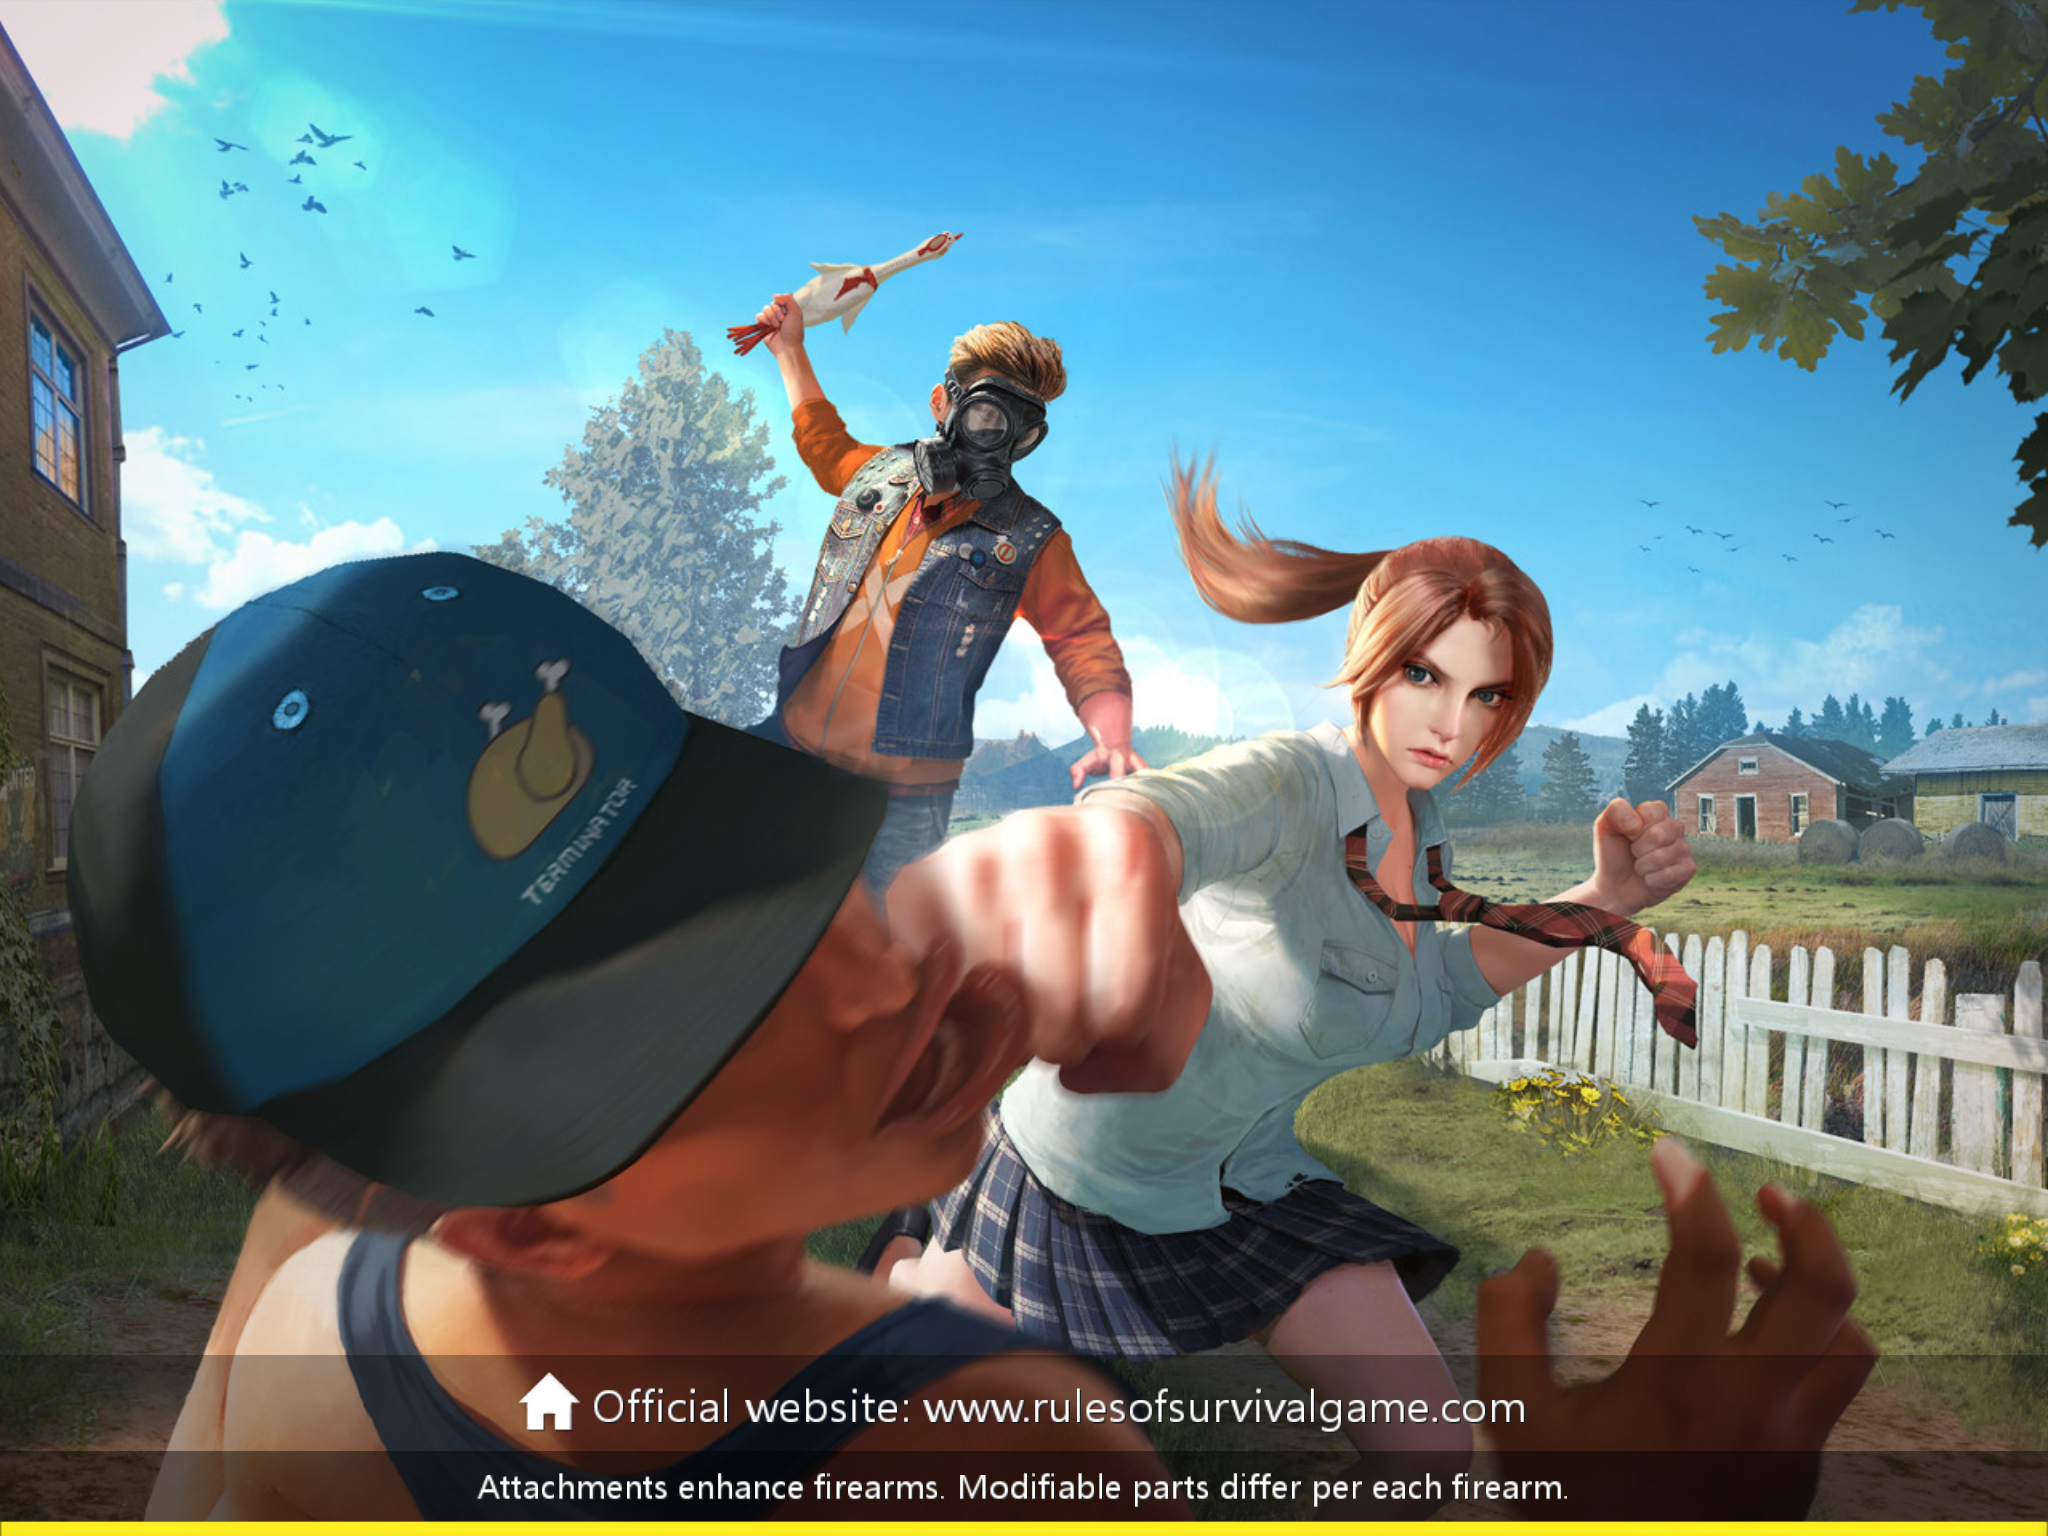 what are the rules of survival